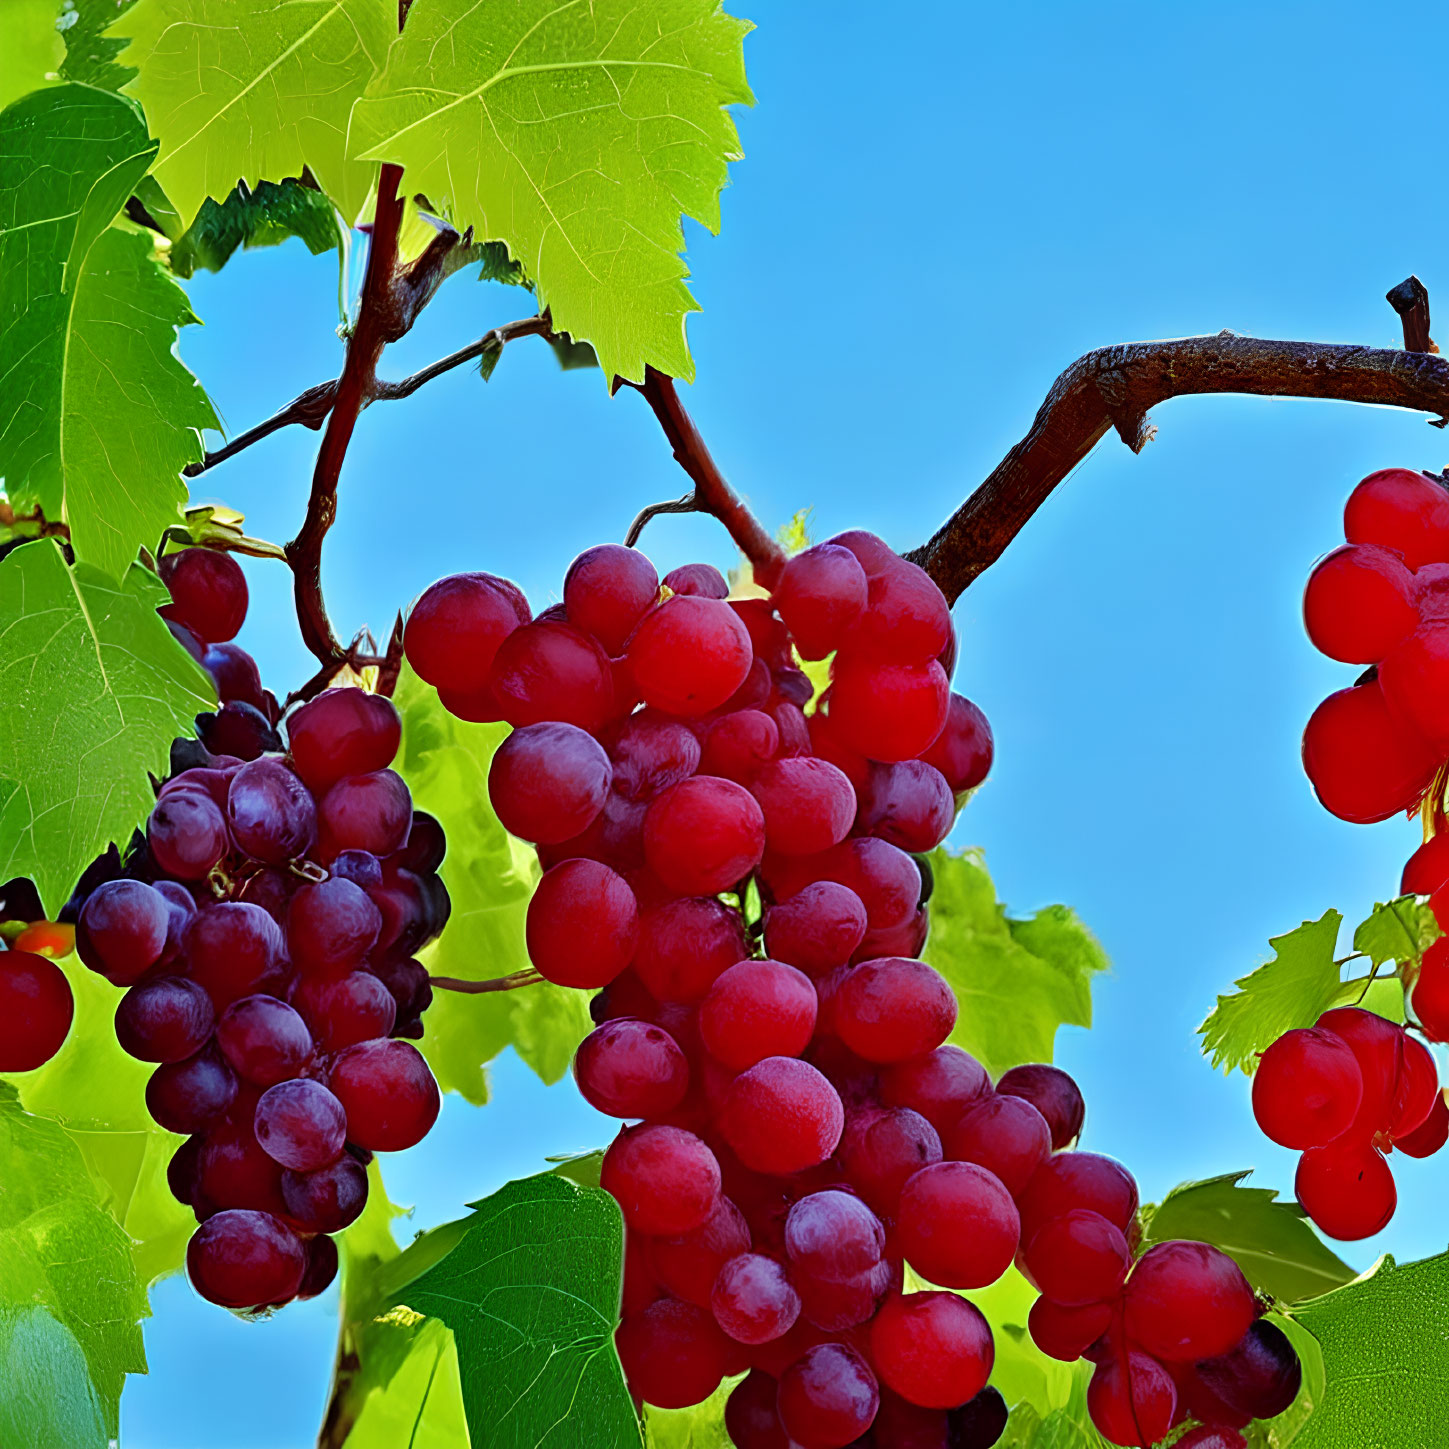 Ripe Red Grapes Hanging from Vine on Sunny Day